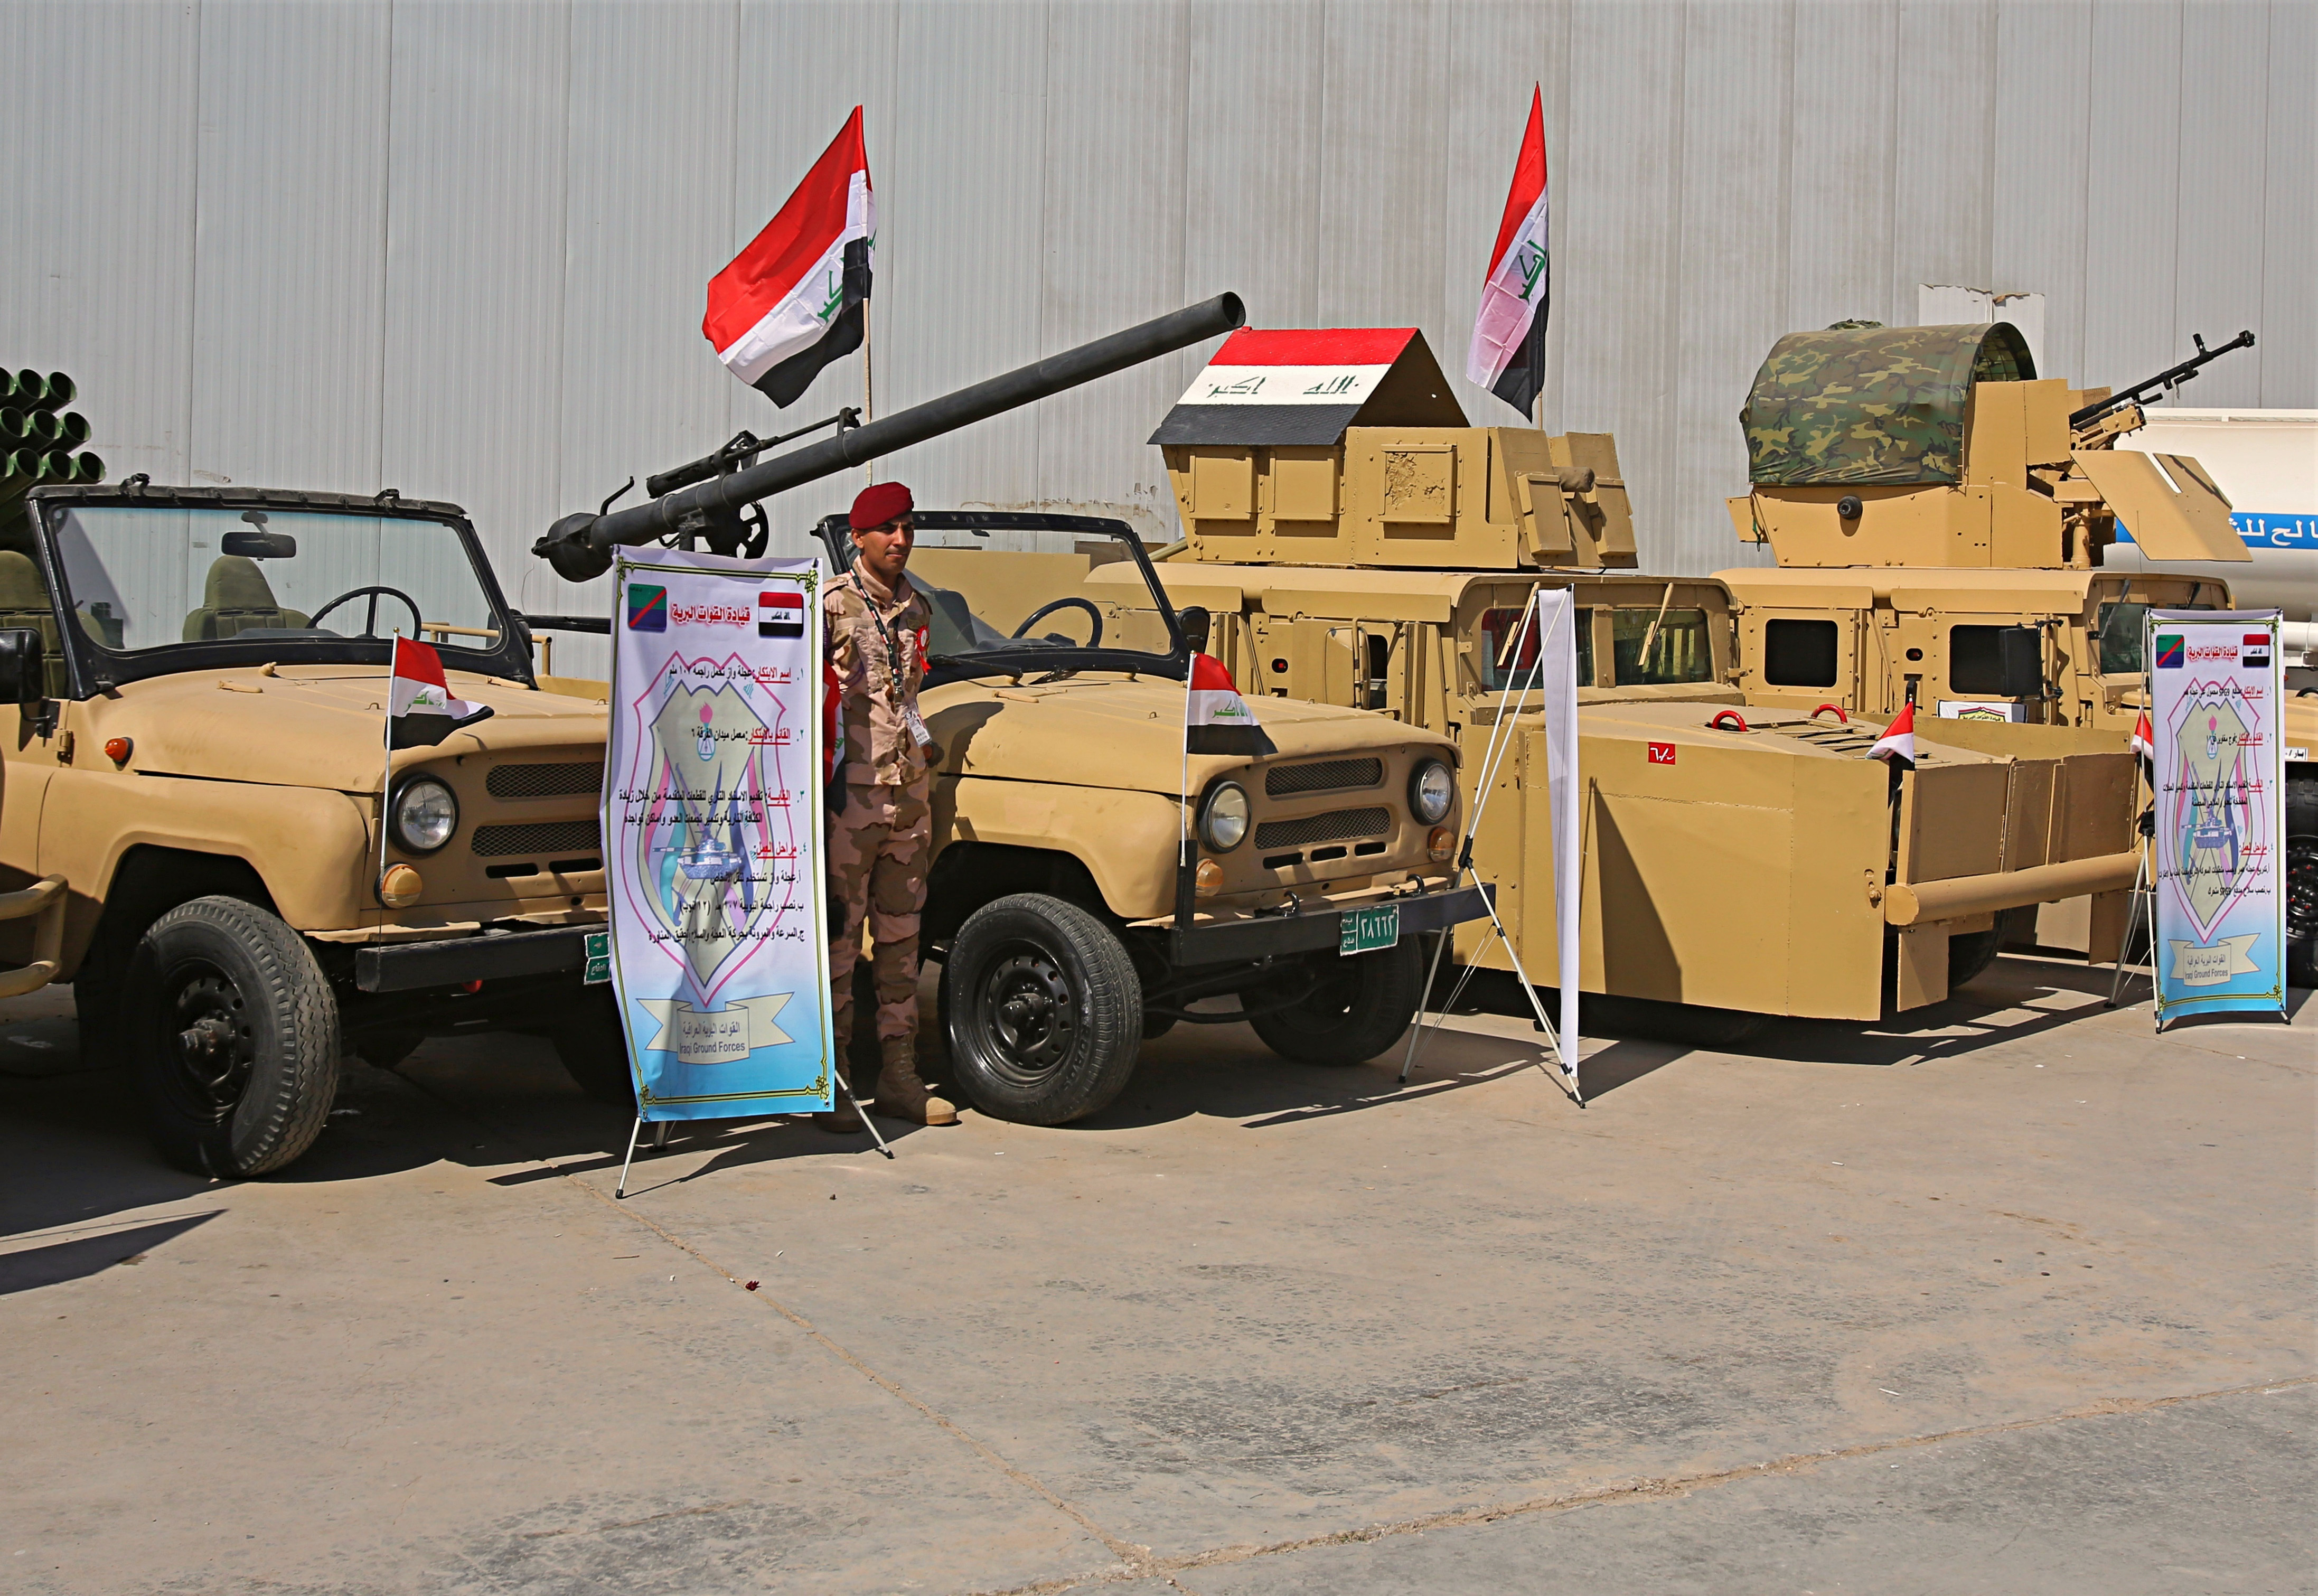 Iraqi military vehicles are on display during the seventh annual weapons exhibition organized by the Iraqi ministry of defense, at the Baghdad International Fairgrounds, Sunday, March, 11, 2018. (AP Photo/Karim Kadim)